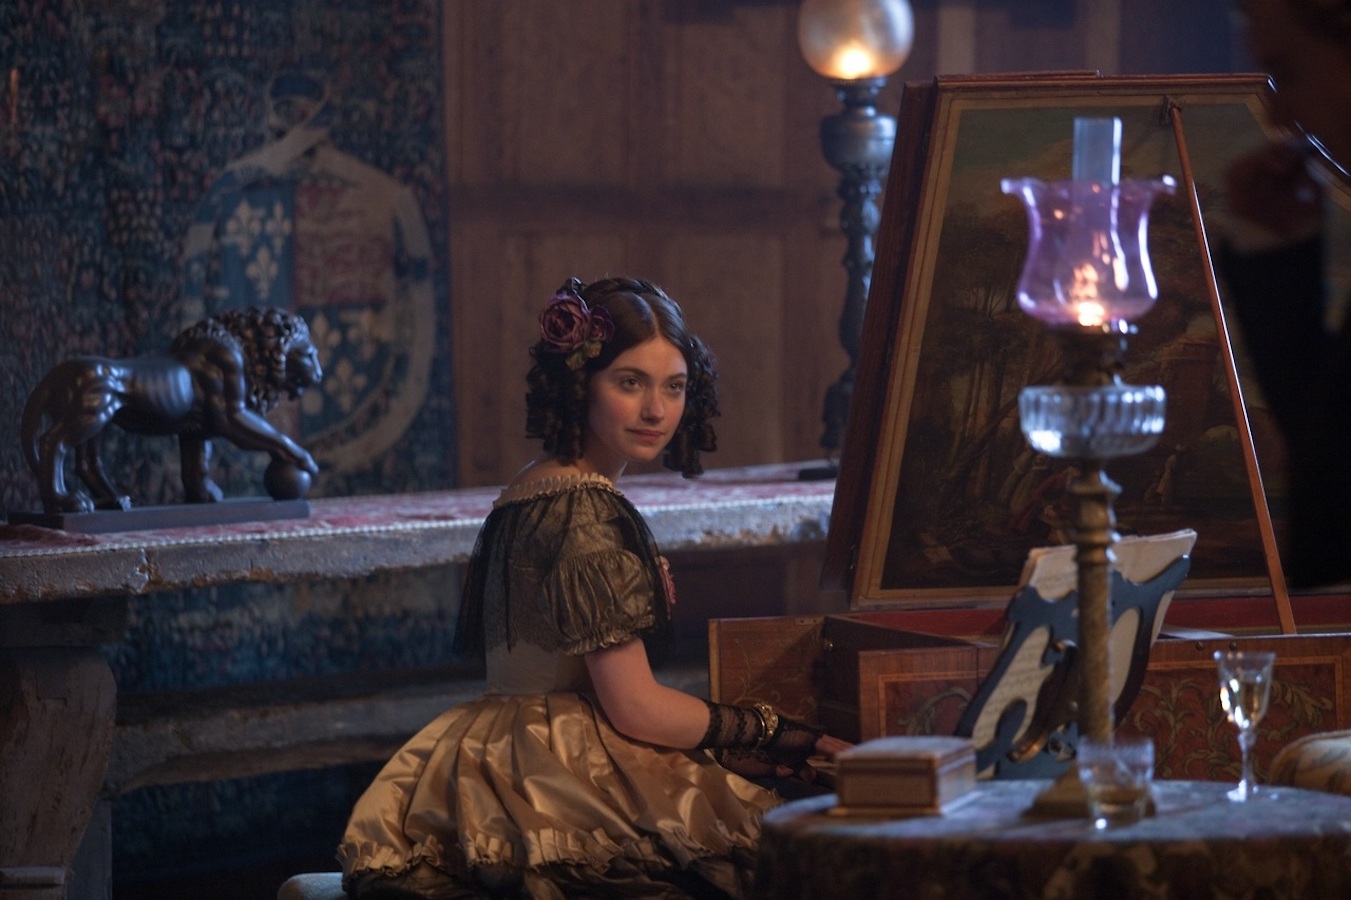 A thin white woman dressed in an elaborate period wear sits at an intricately carved and painted piano. Her hair is in tight coils, and she looks sternly past the camera. The room she is in is lit by waning daylight and two lamps. Behind her, the statue of a lion stands on a wooden table, positioned against a wood-paneled wall. A faded tapestry hangs, cluttering the shot with even more background color, pattern, and texture.